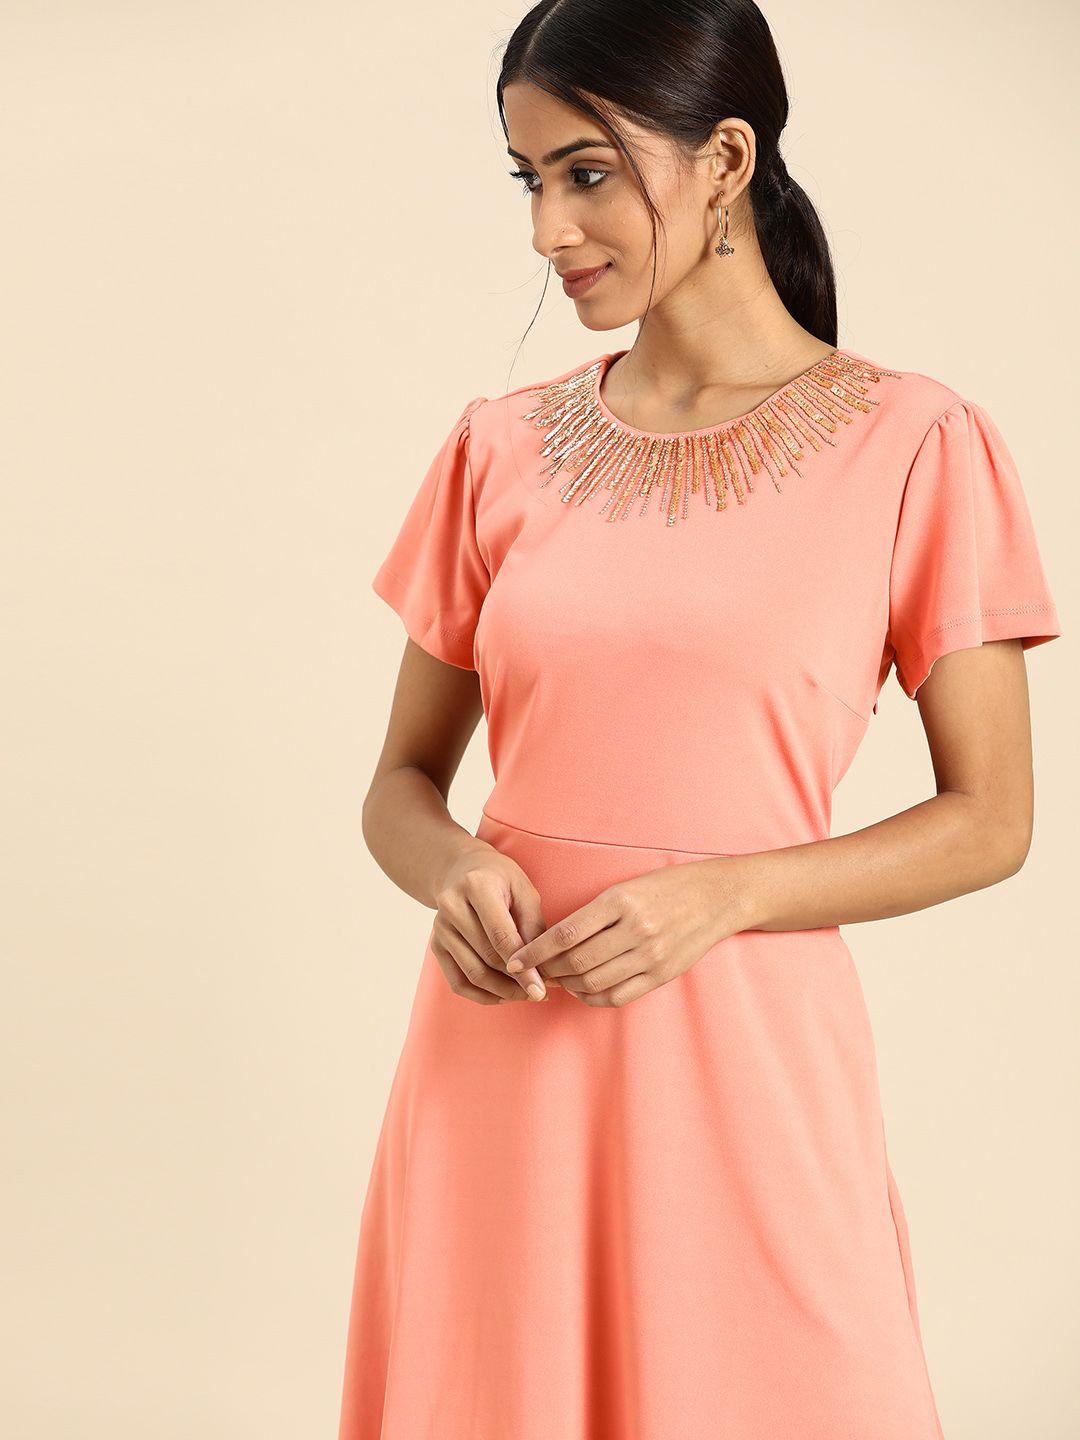 all about you pink solid a-line dress with embellished detail